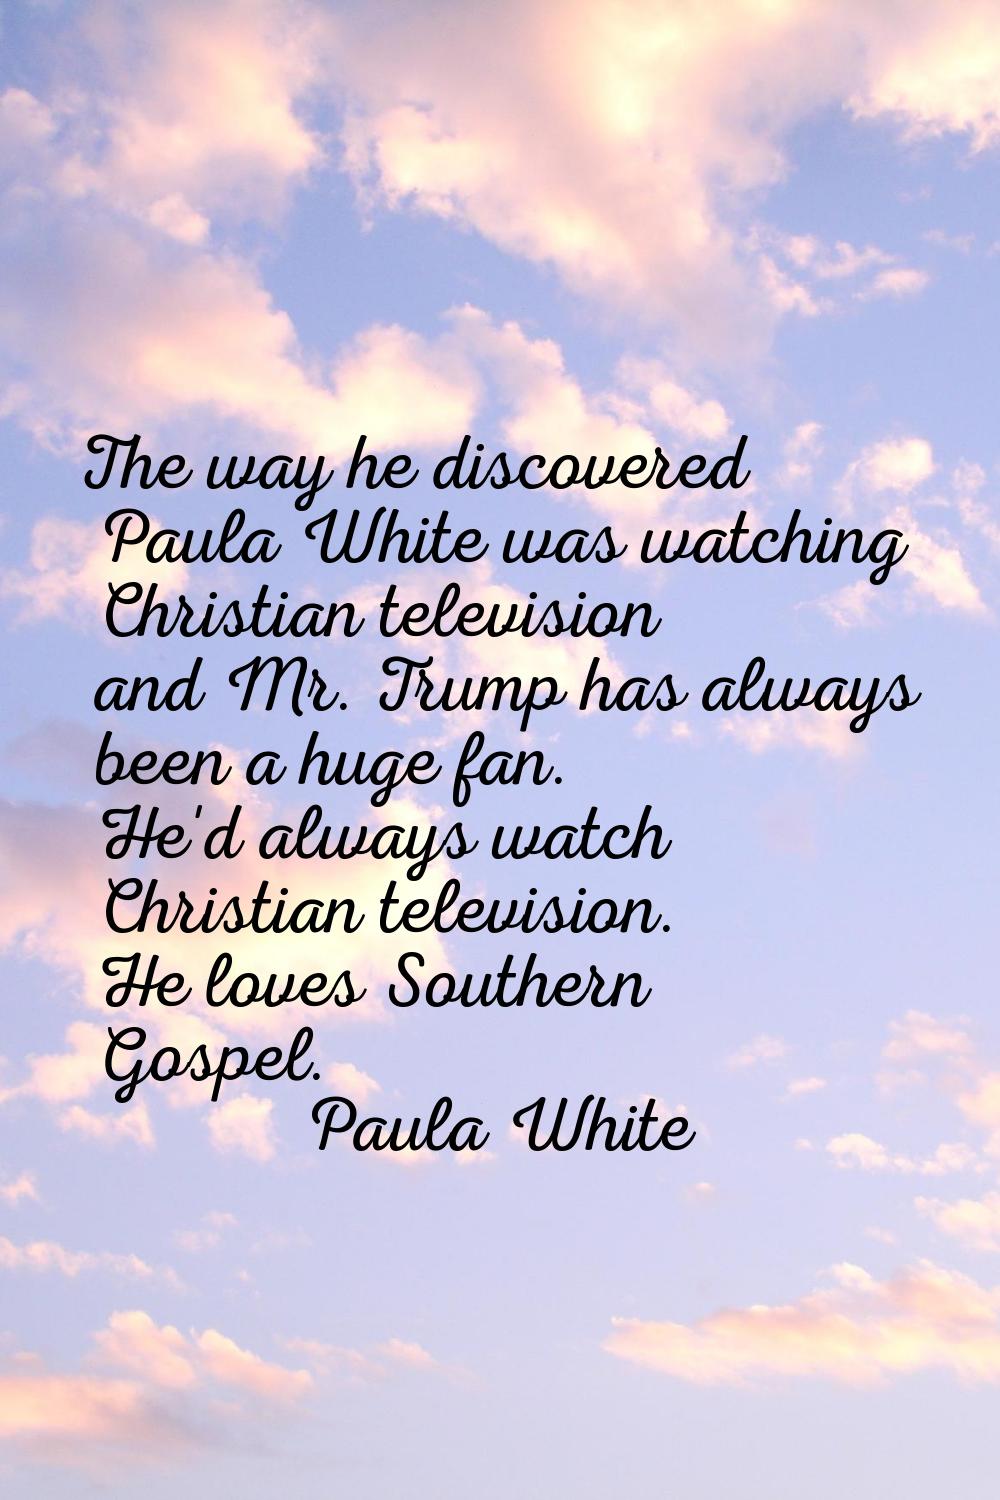 The way he discovered Paula White was watching Christian television and Mr. Trump has always been a